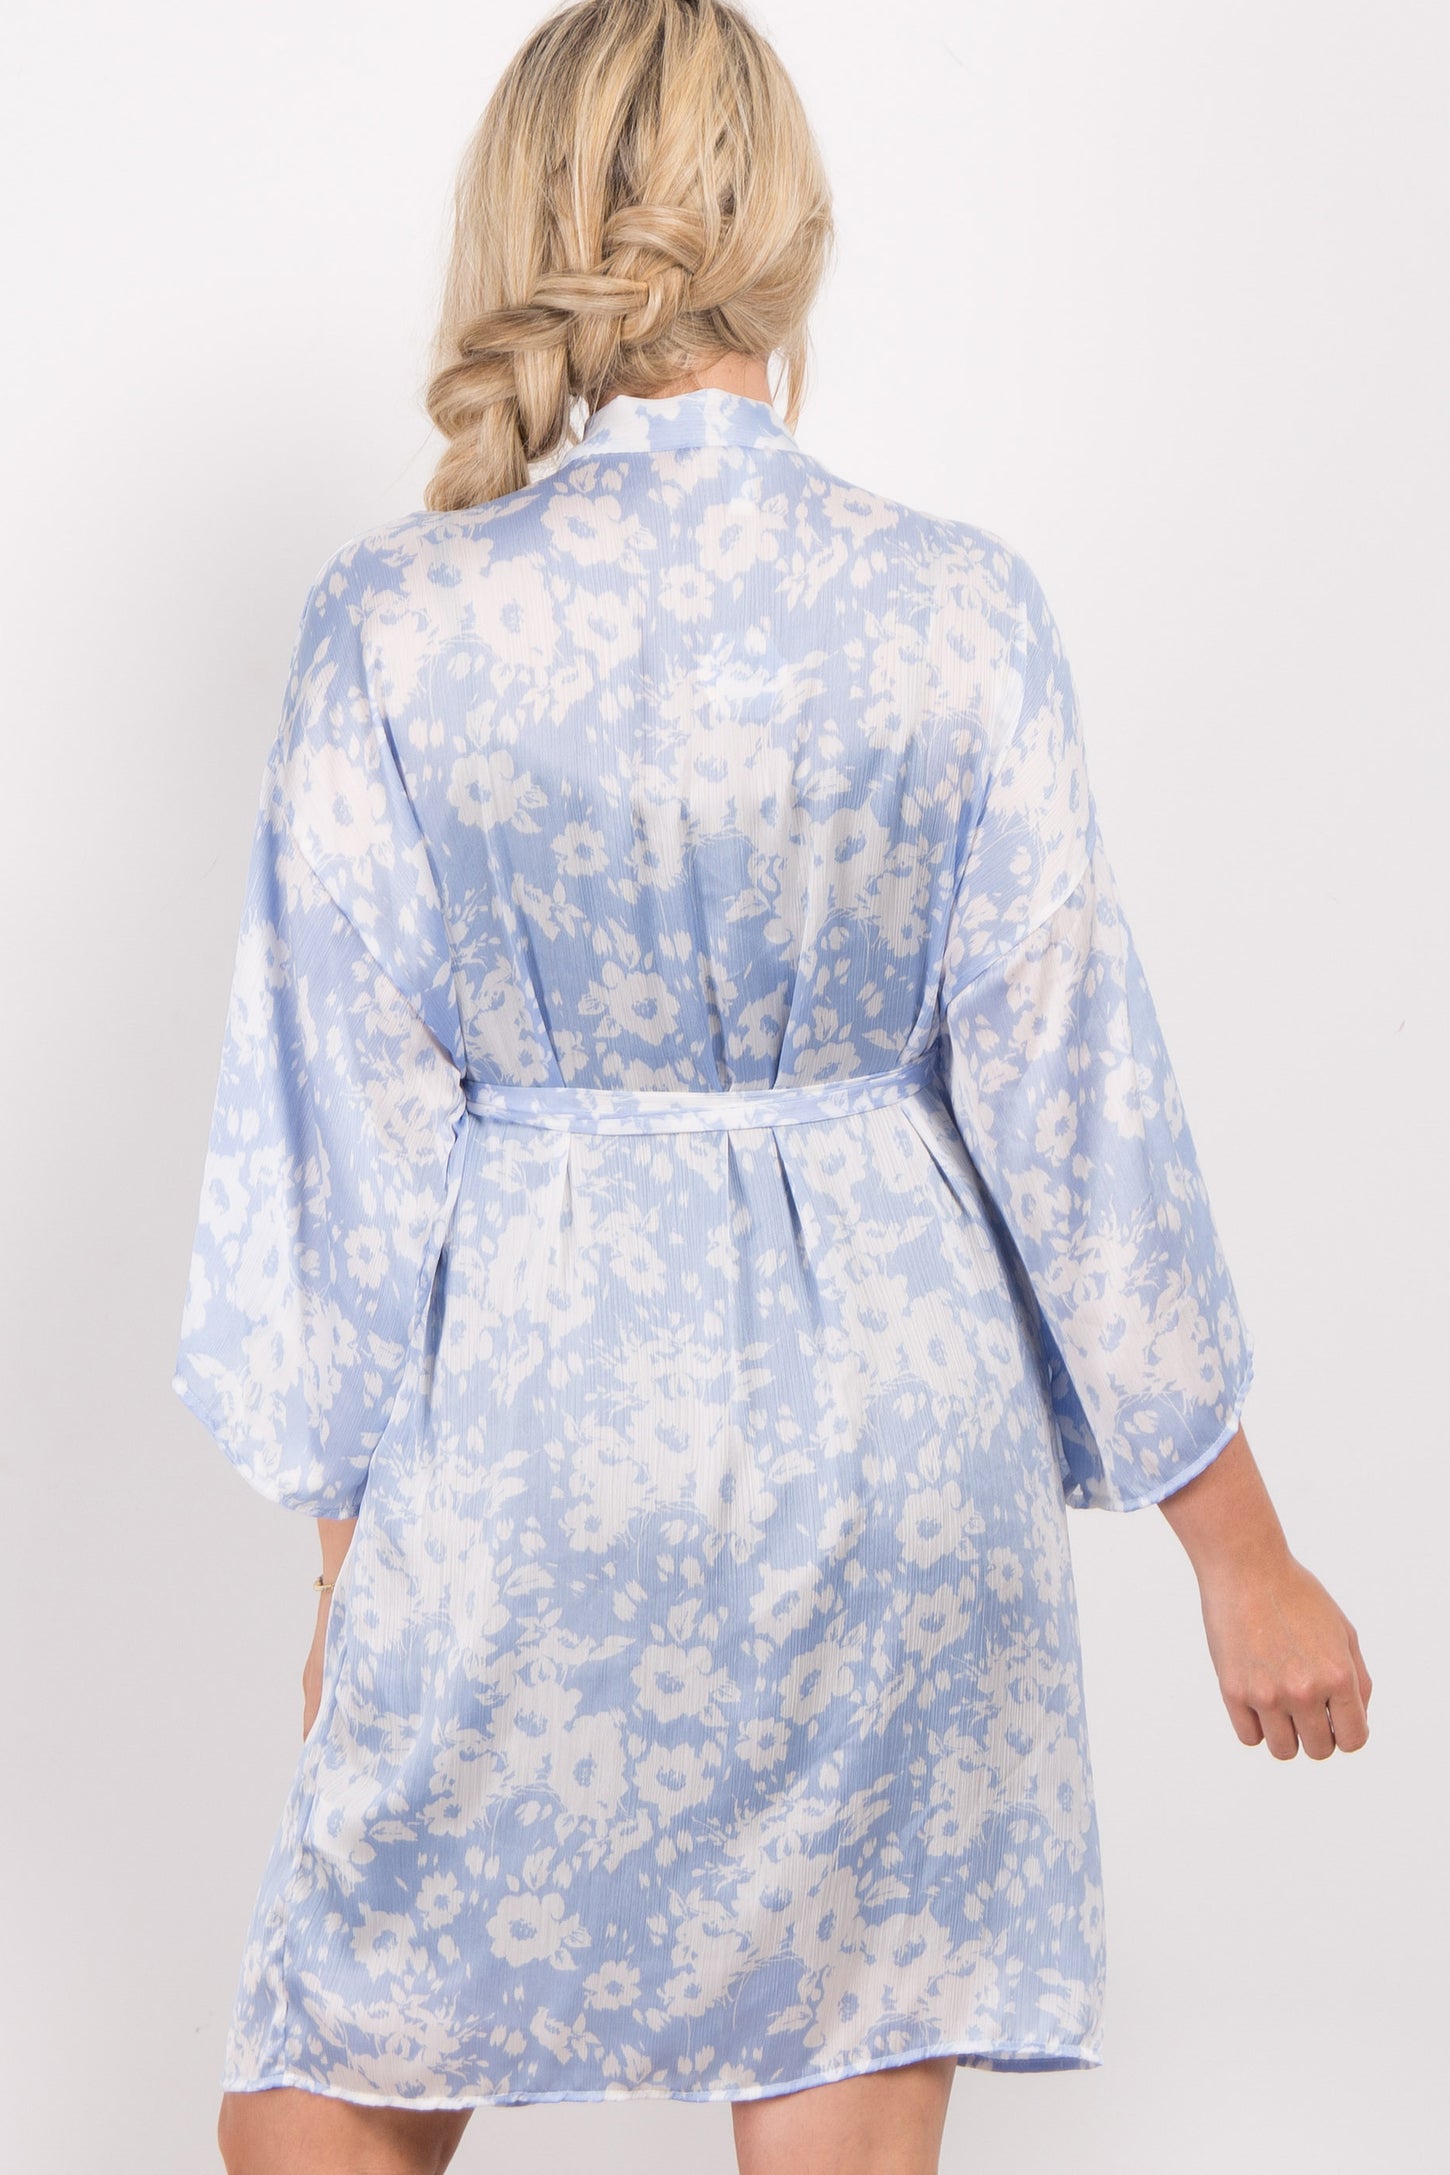 Blue Floral Chiffon Delivery/Nursing Maternity Robe